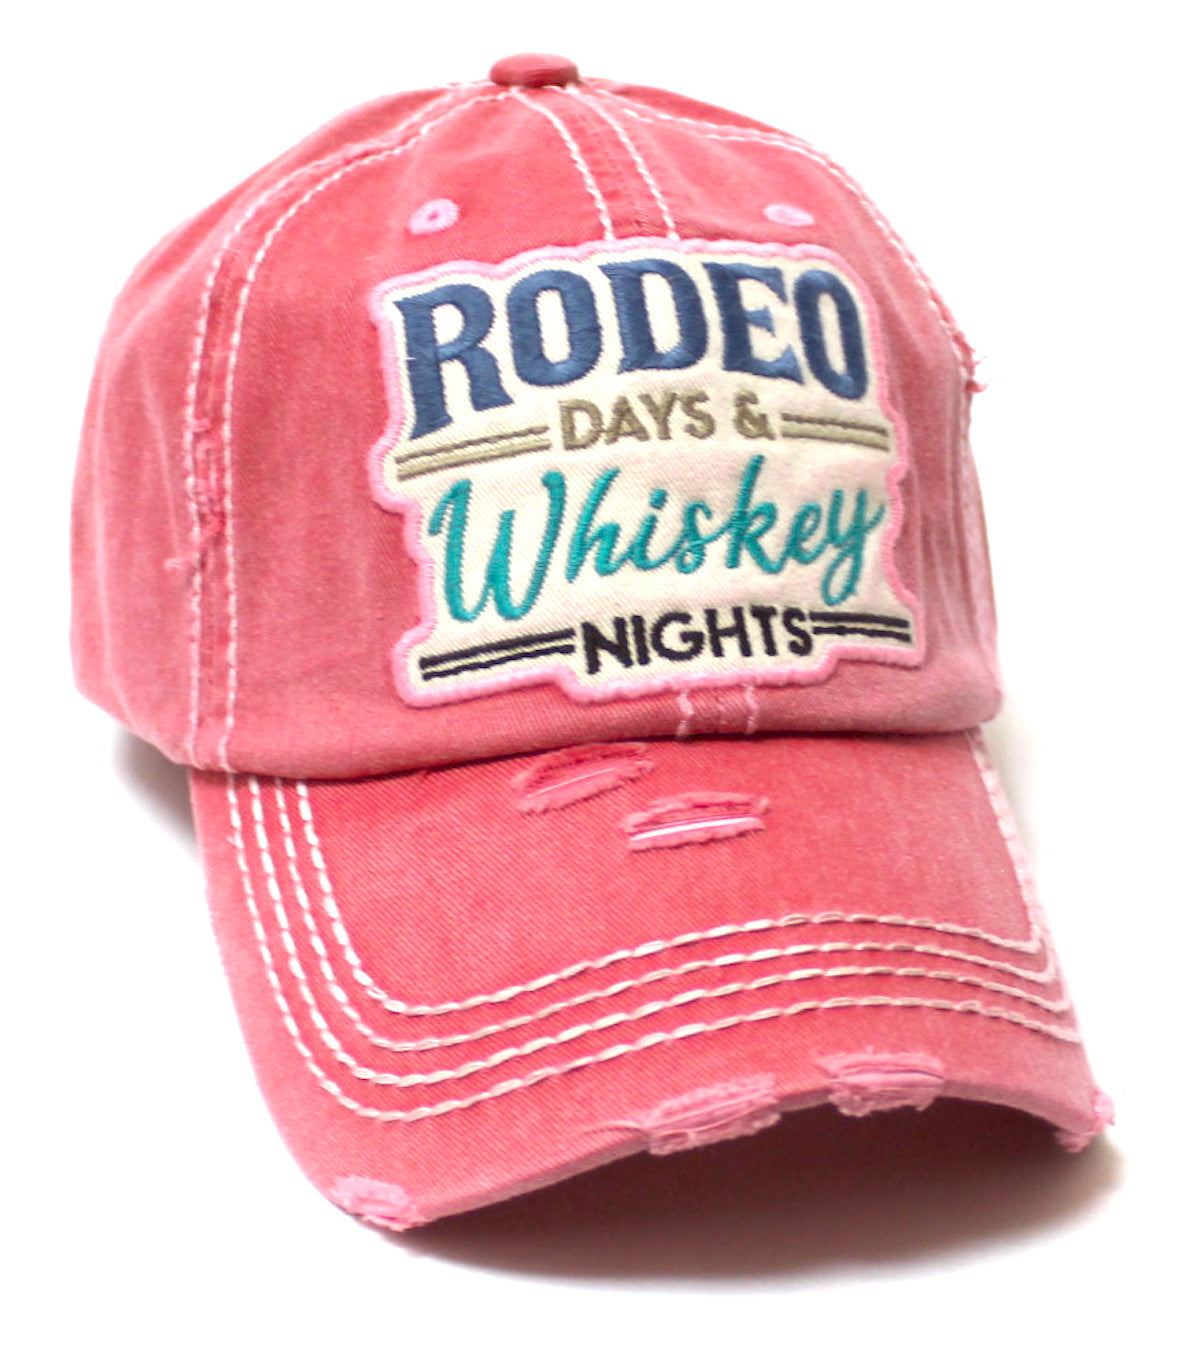 Rodeo Days Whiskey Nights Baseball Cap - Distressed Hats for Women - Summer Style Accessory in Rose Pink Love - Caps 'N Vintage 